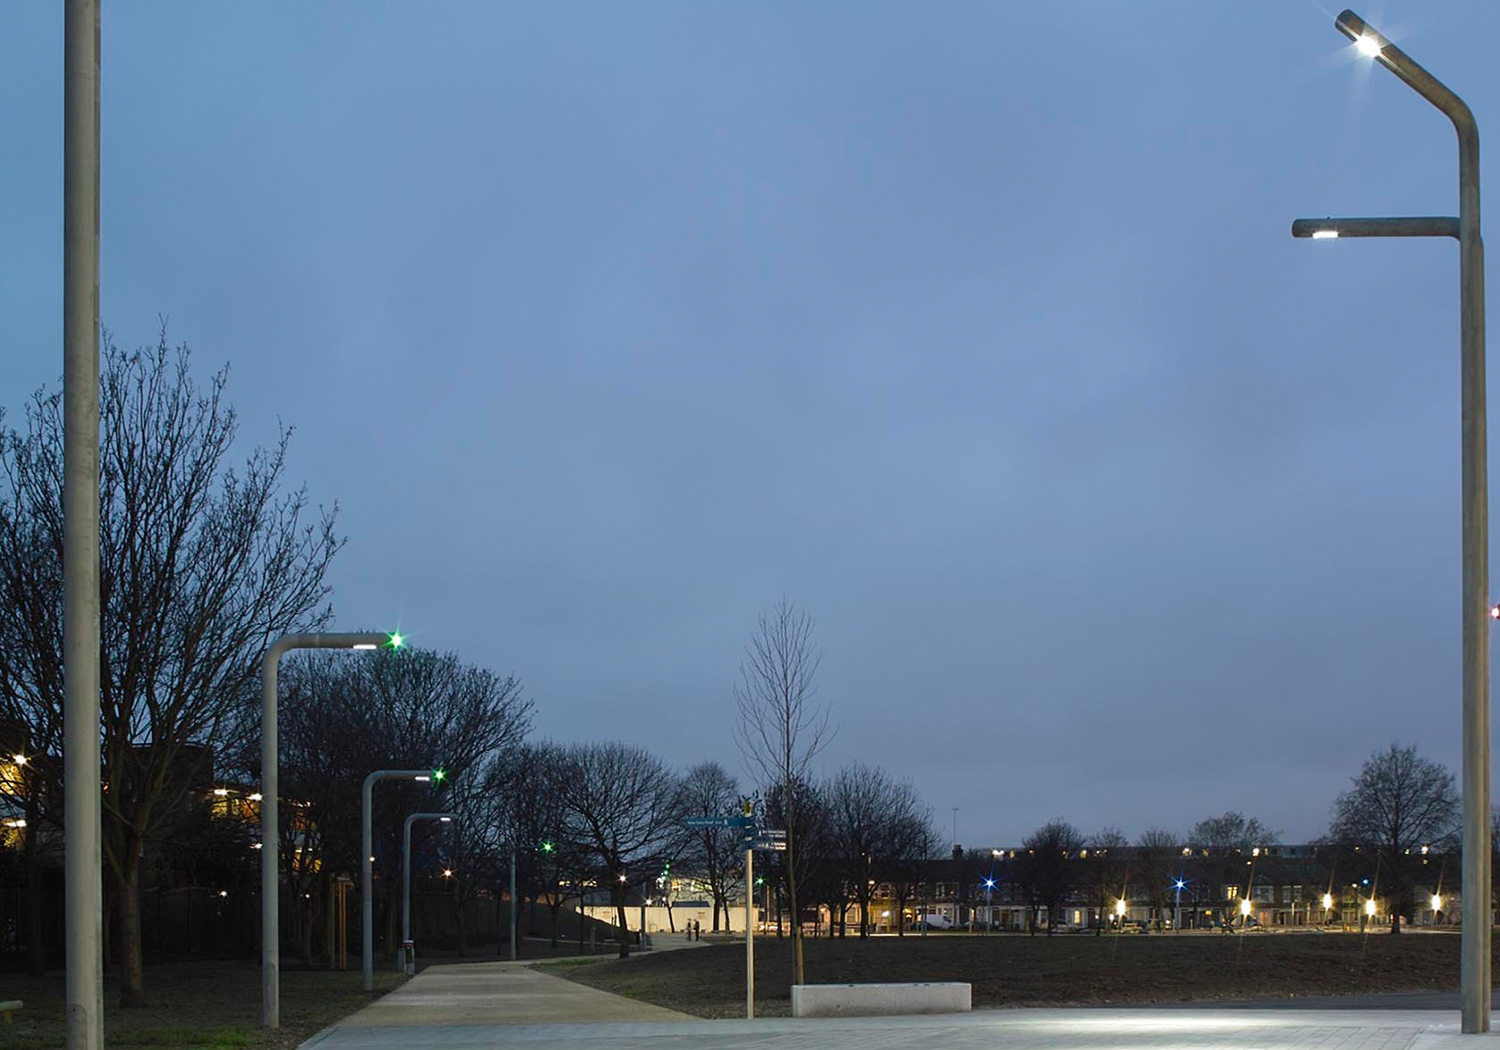 Projects-ParksPublicRealm-FordhamPark-Lighting-1500x1050